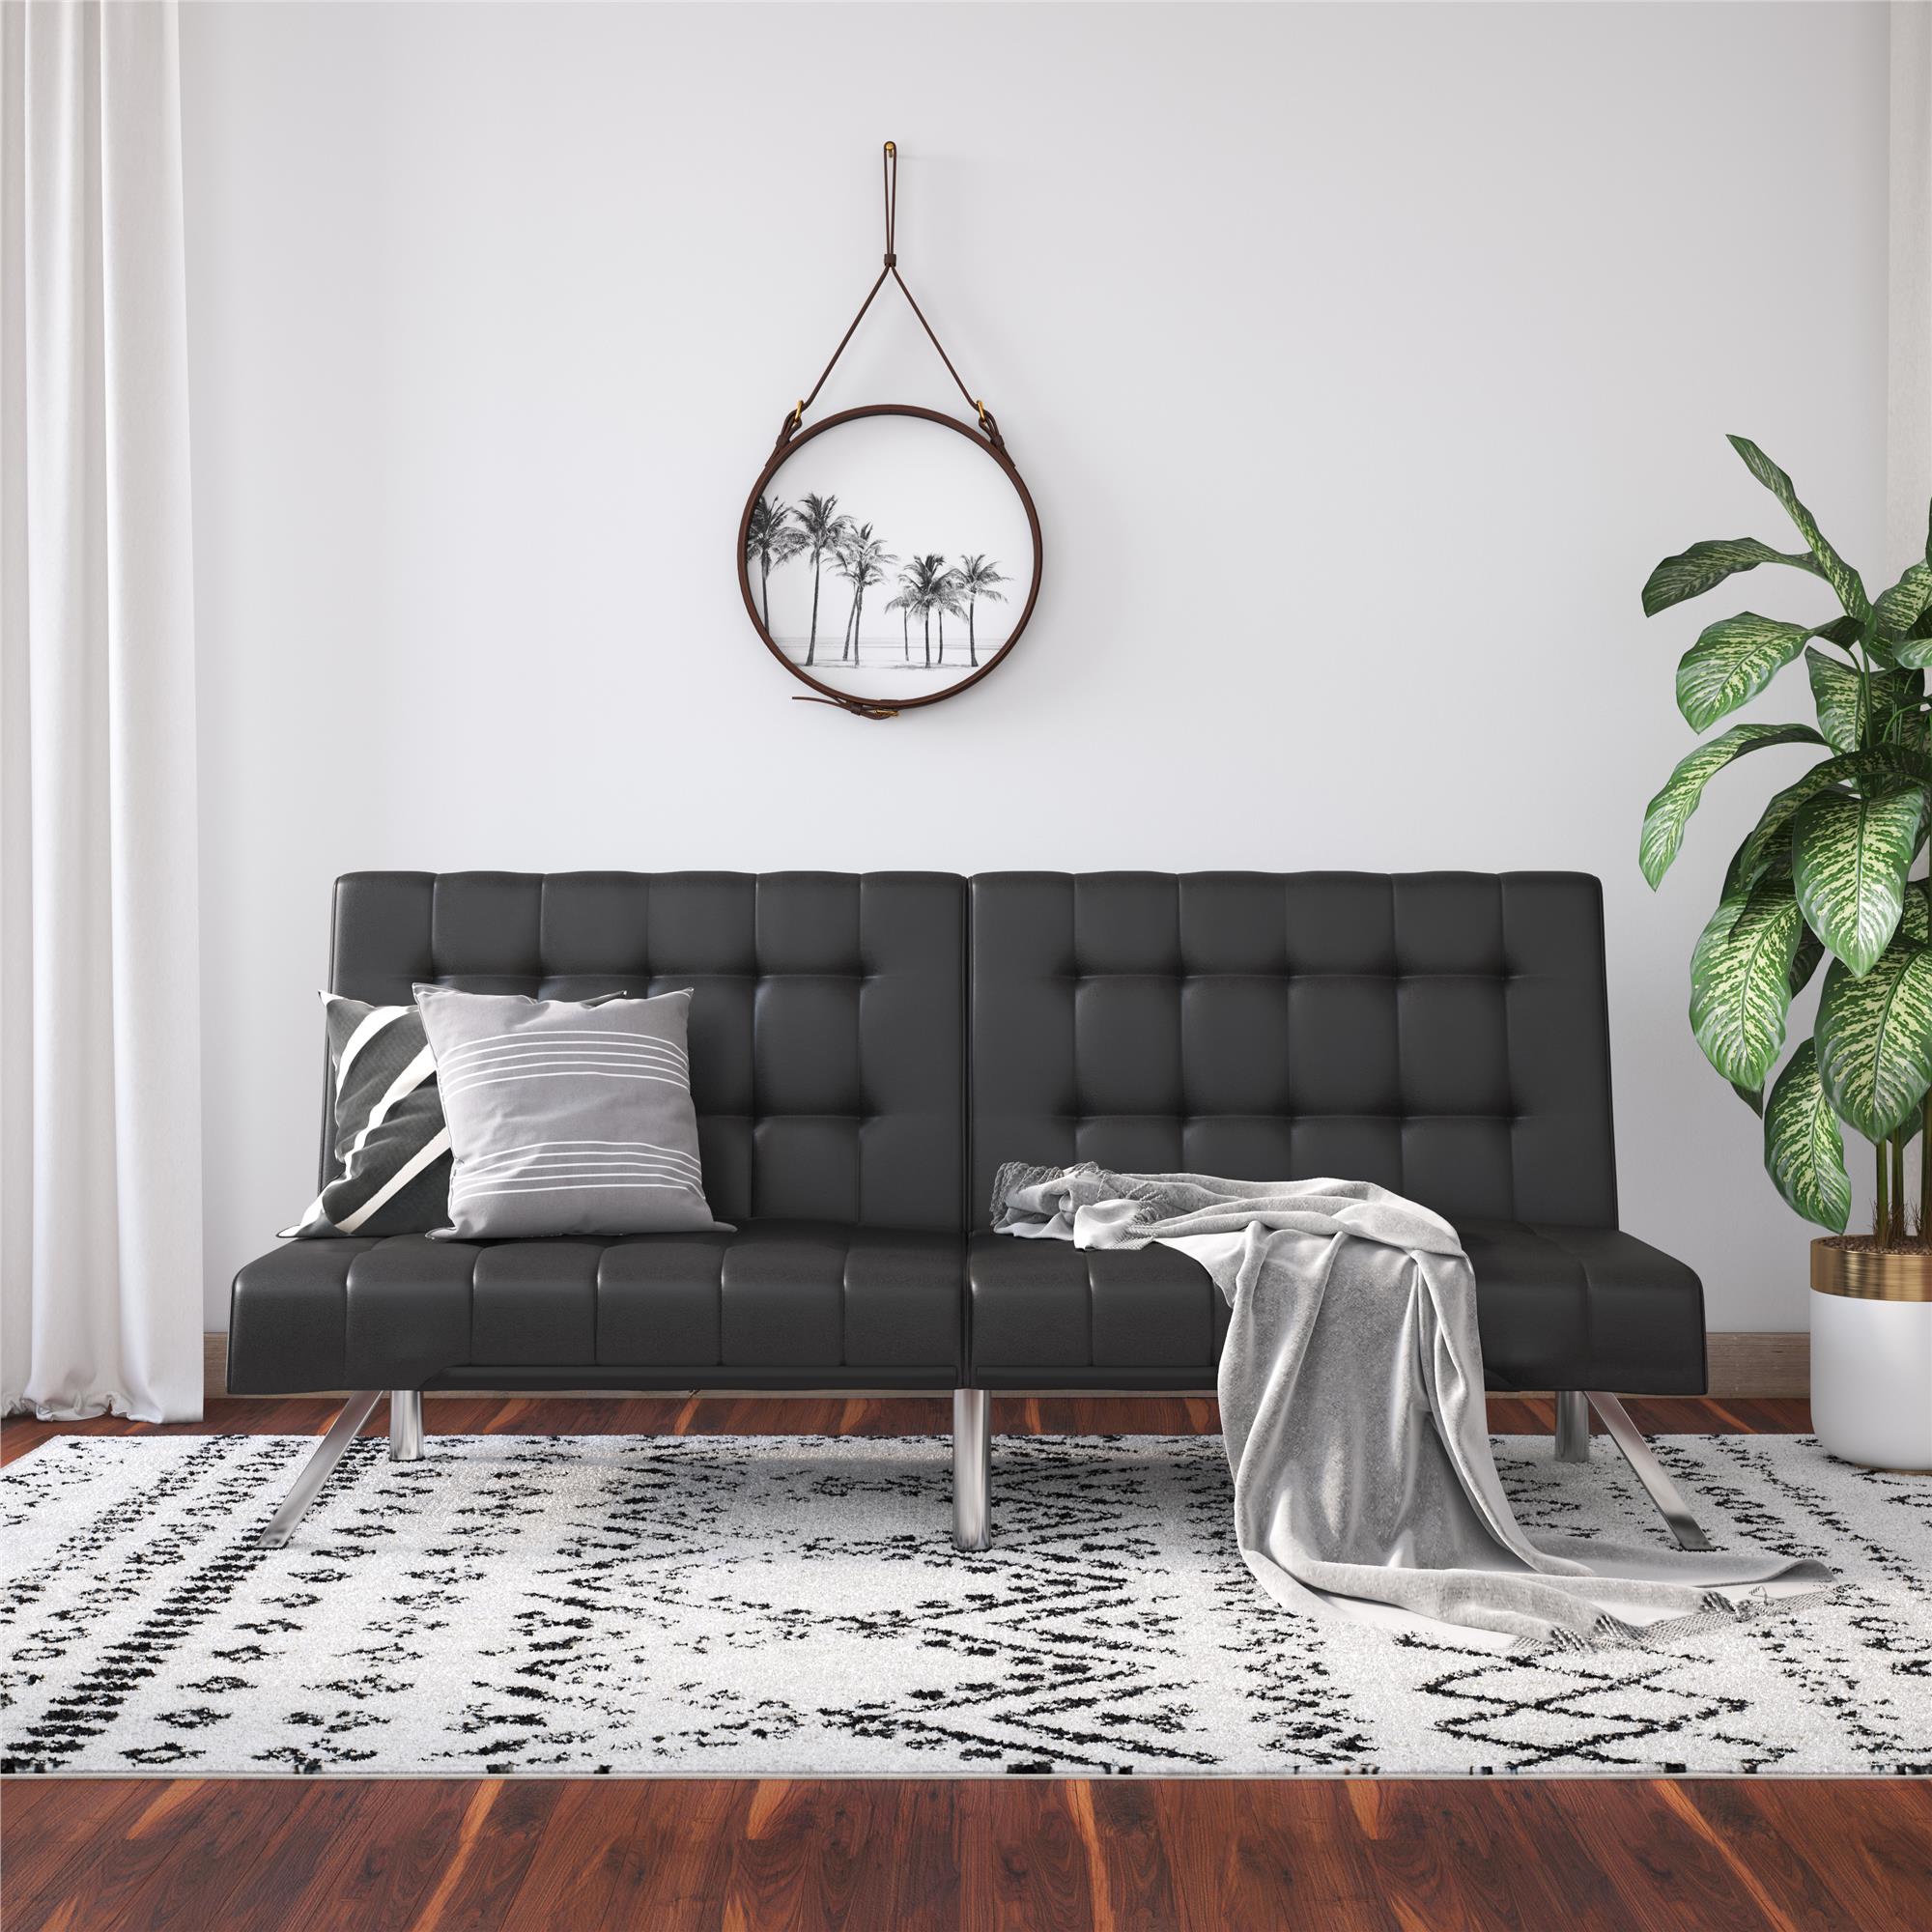 River Street Designs Emily Convertible Tufted Futon Sofa, Black Faux Leather - image 1 of 21